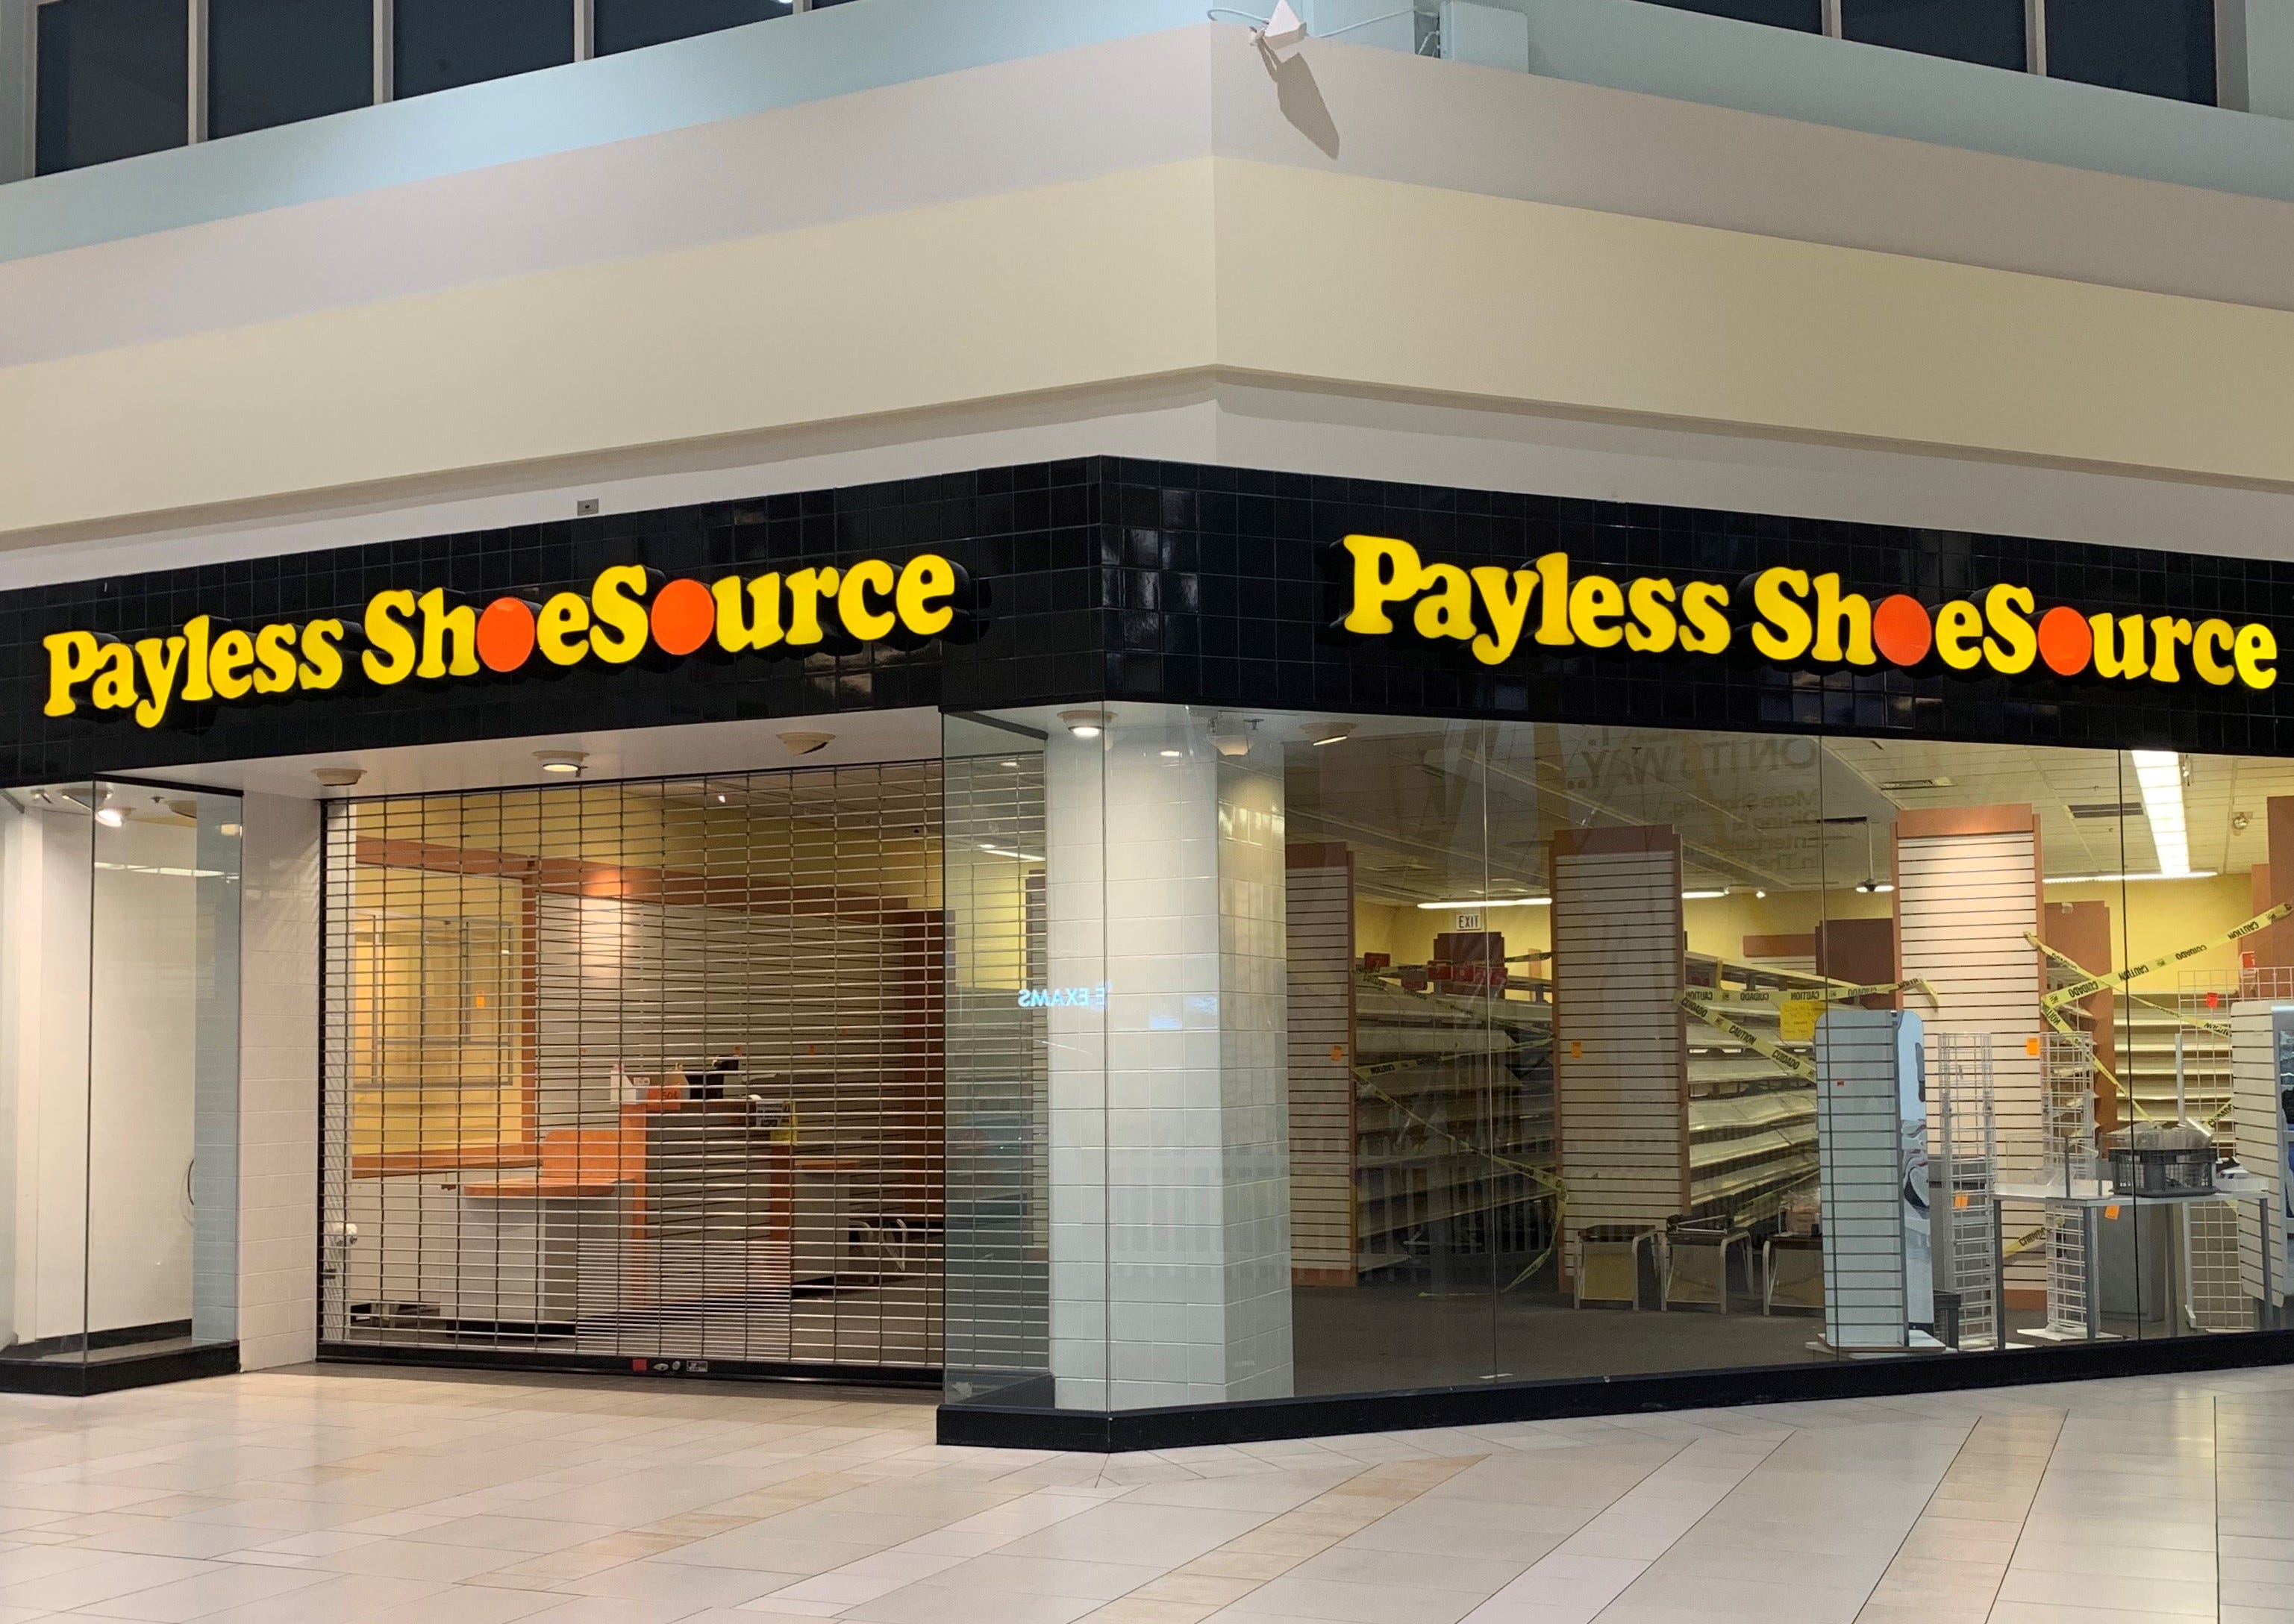 payless sale online